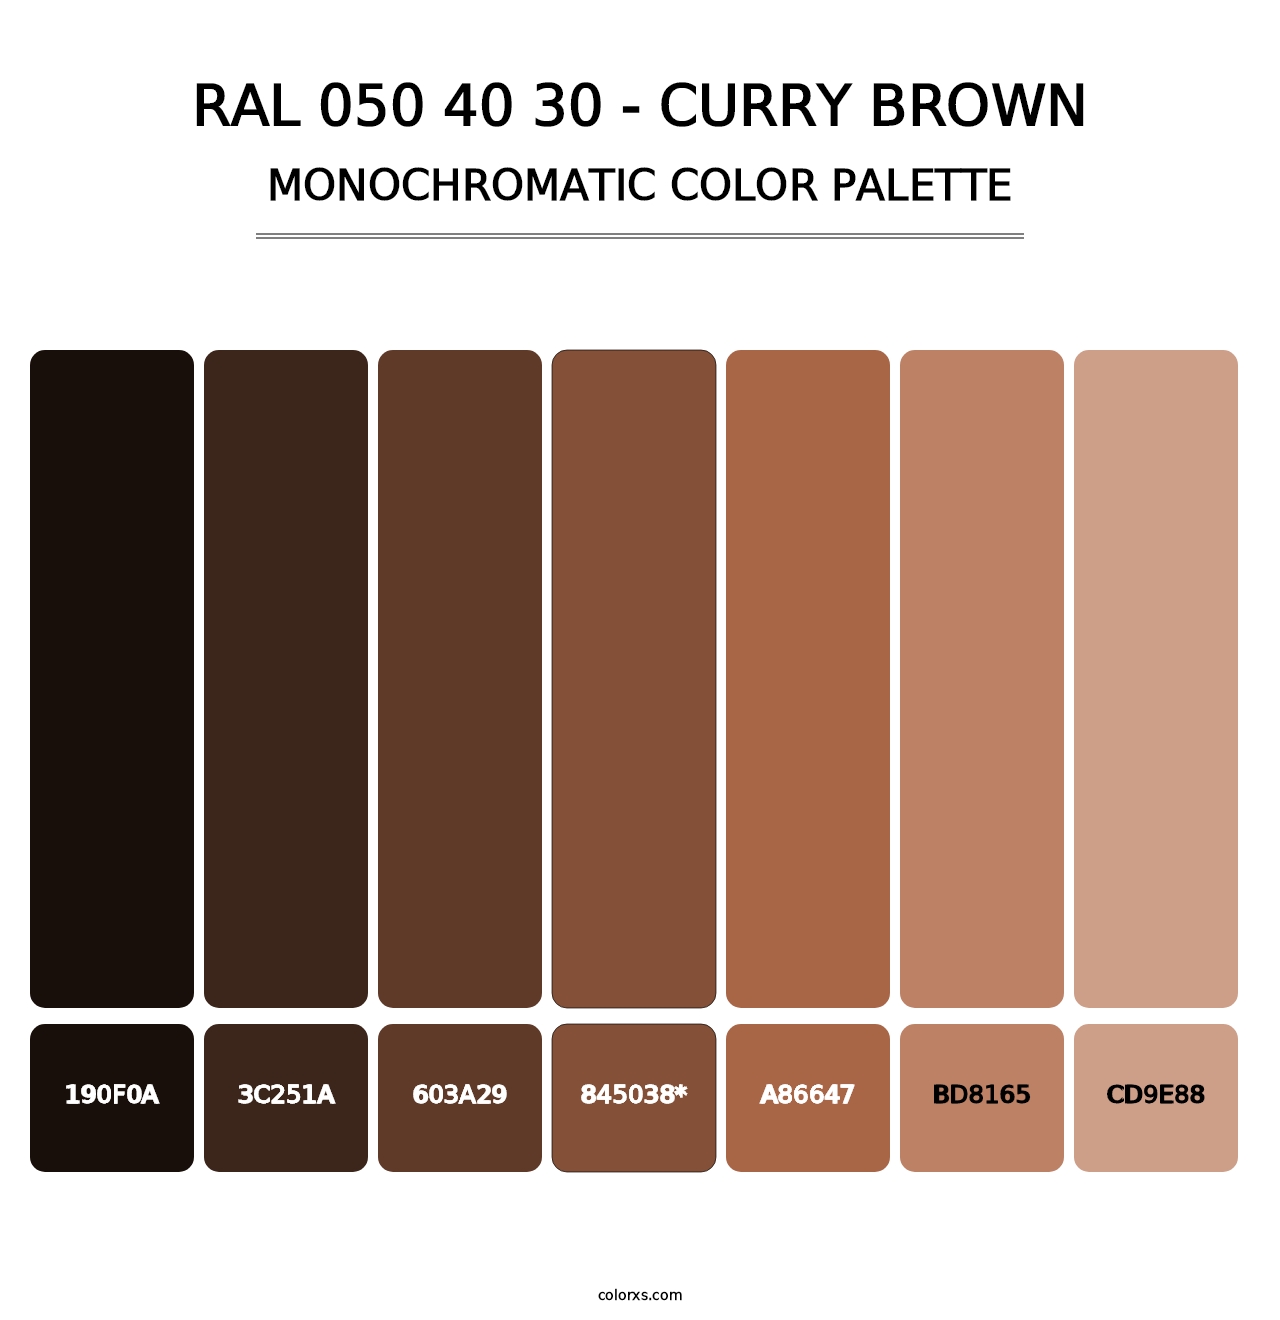 RAL 050 40 30 - Curry Brown - Monochromatic Color Palette